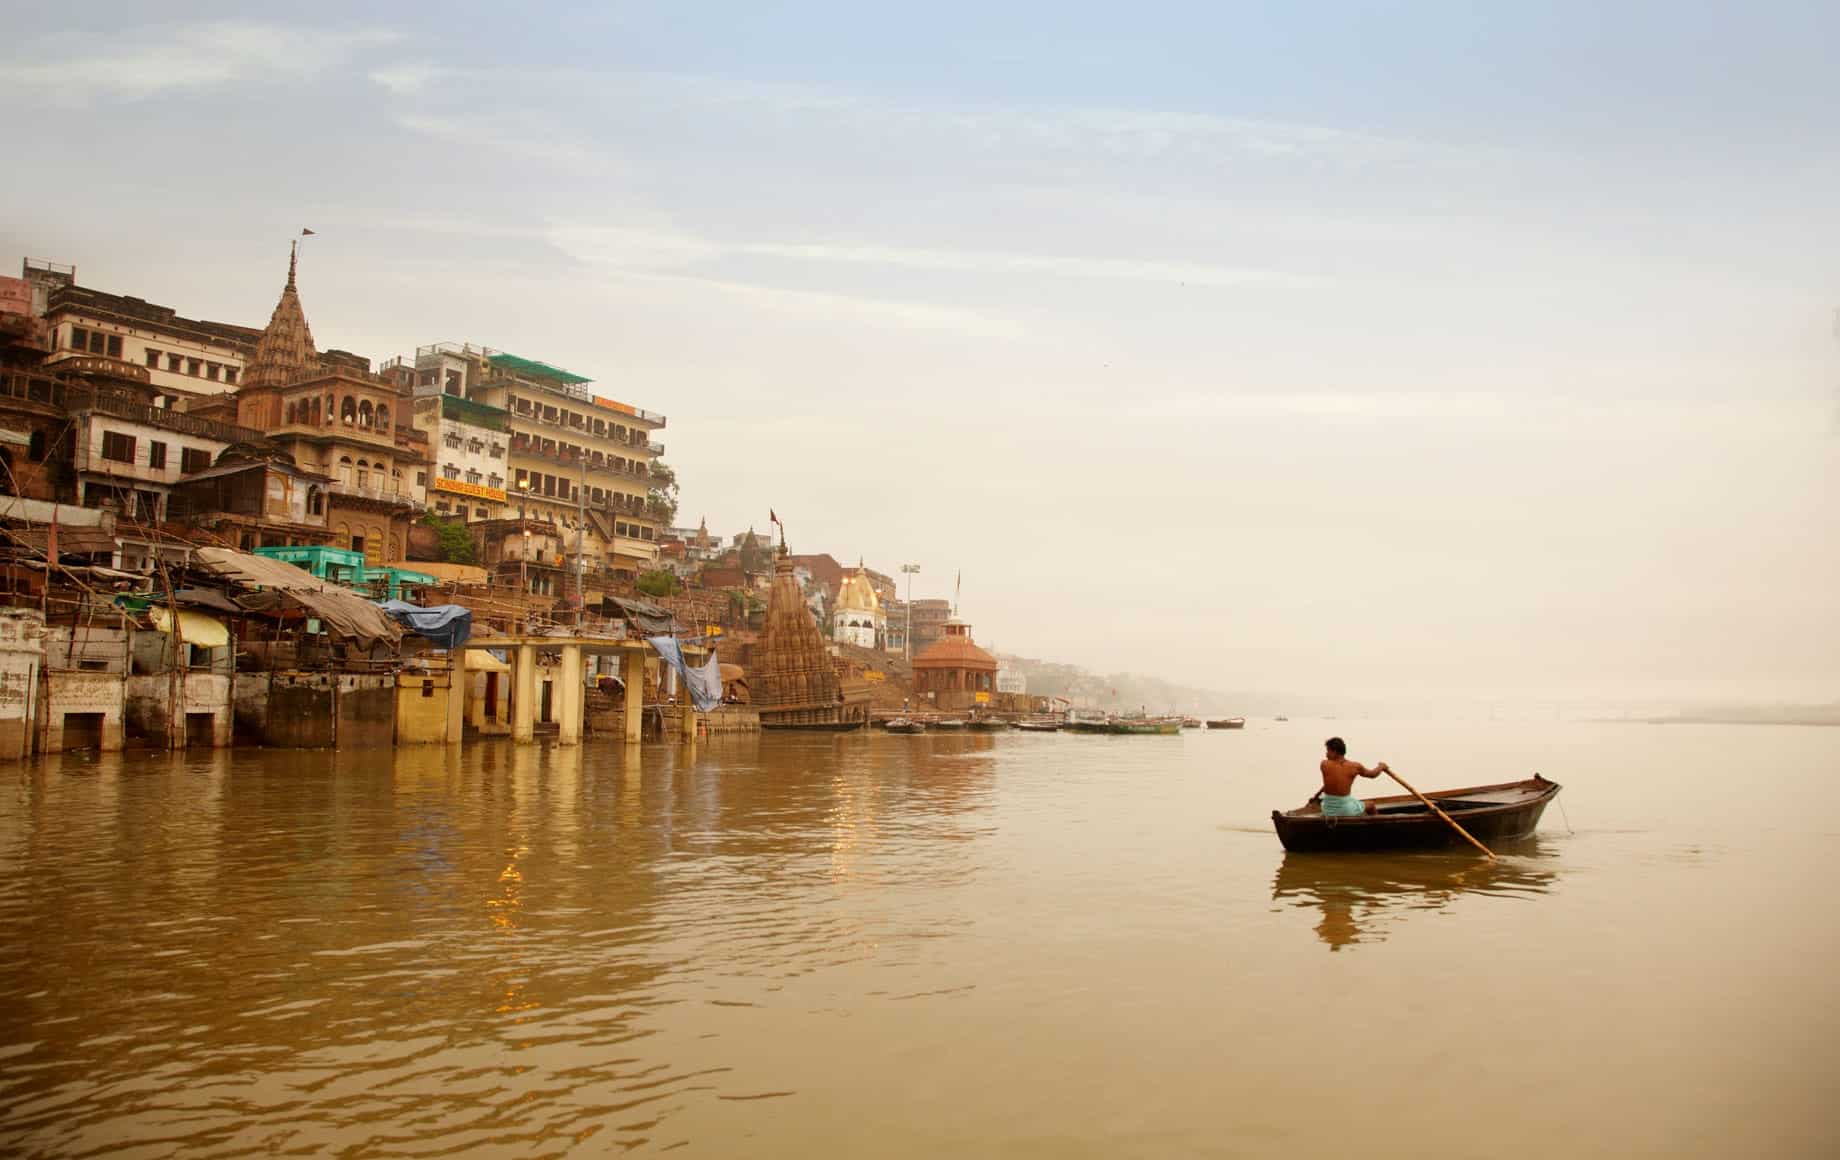 Varanasi is known for its spirituality and diversity